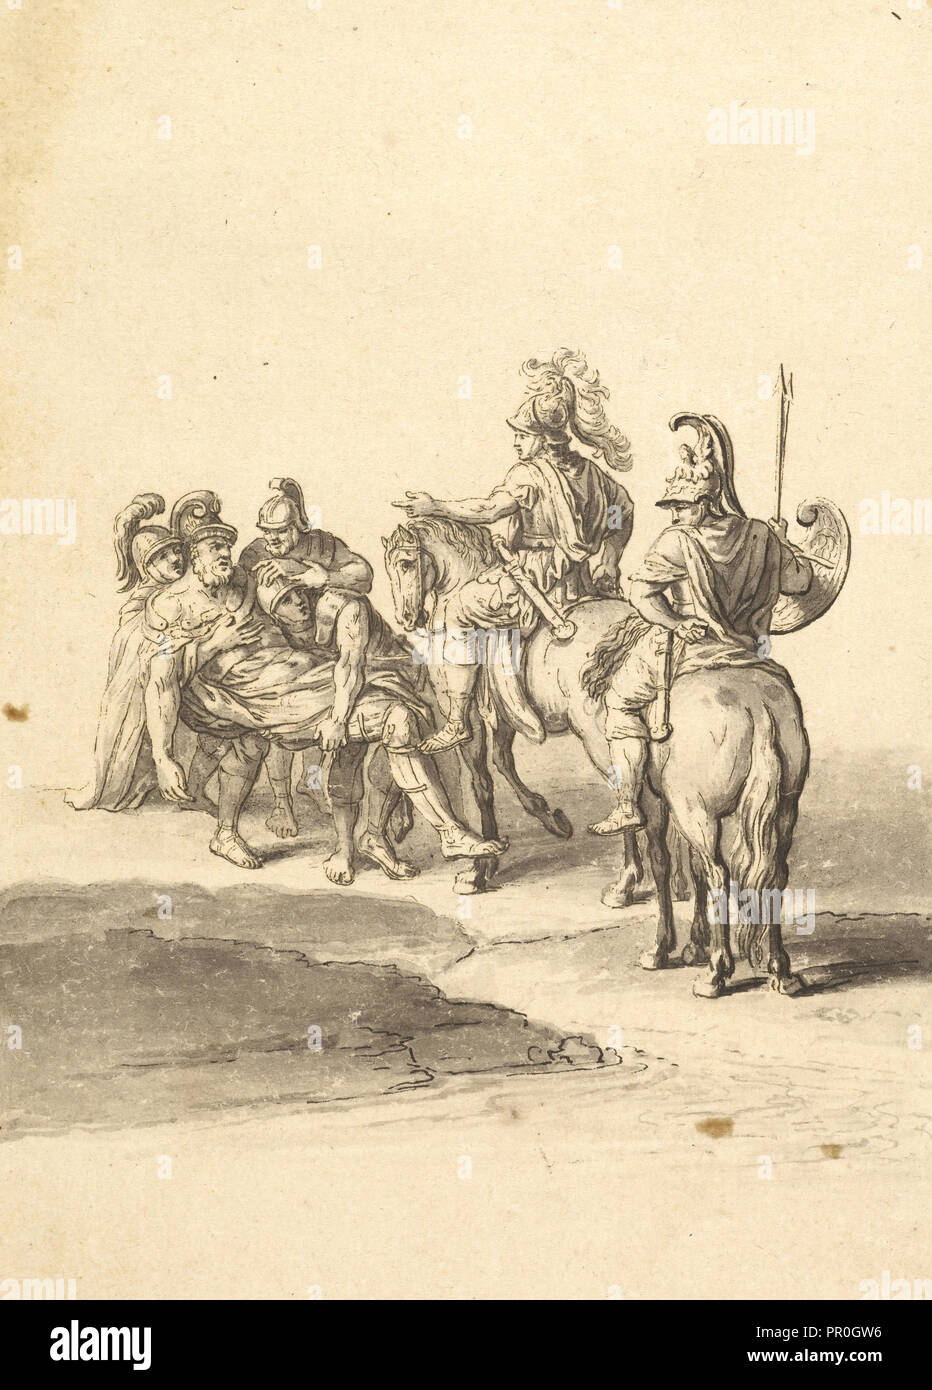 Groupe Alexandre et Porus, Drawings after the Battles of Alexander by Charles Le Brun, Le Brun, Charles, 1619-1690, Picart Stock Photo